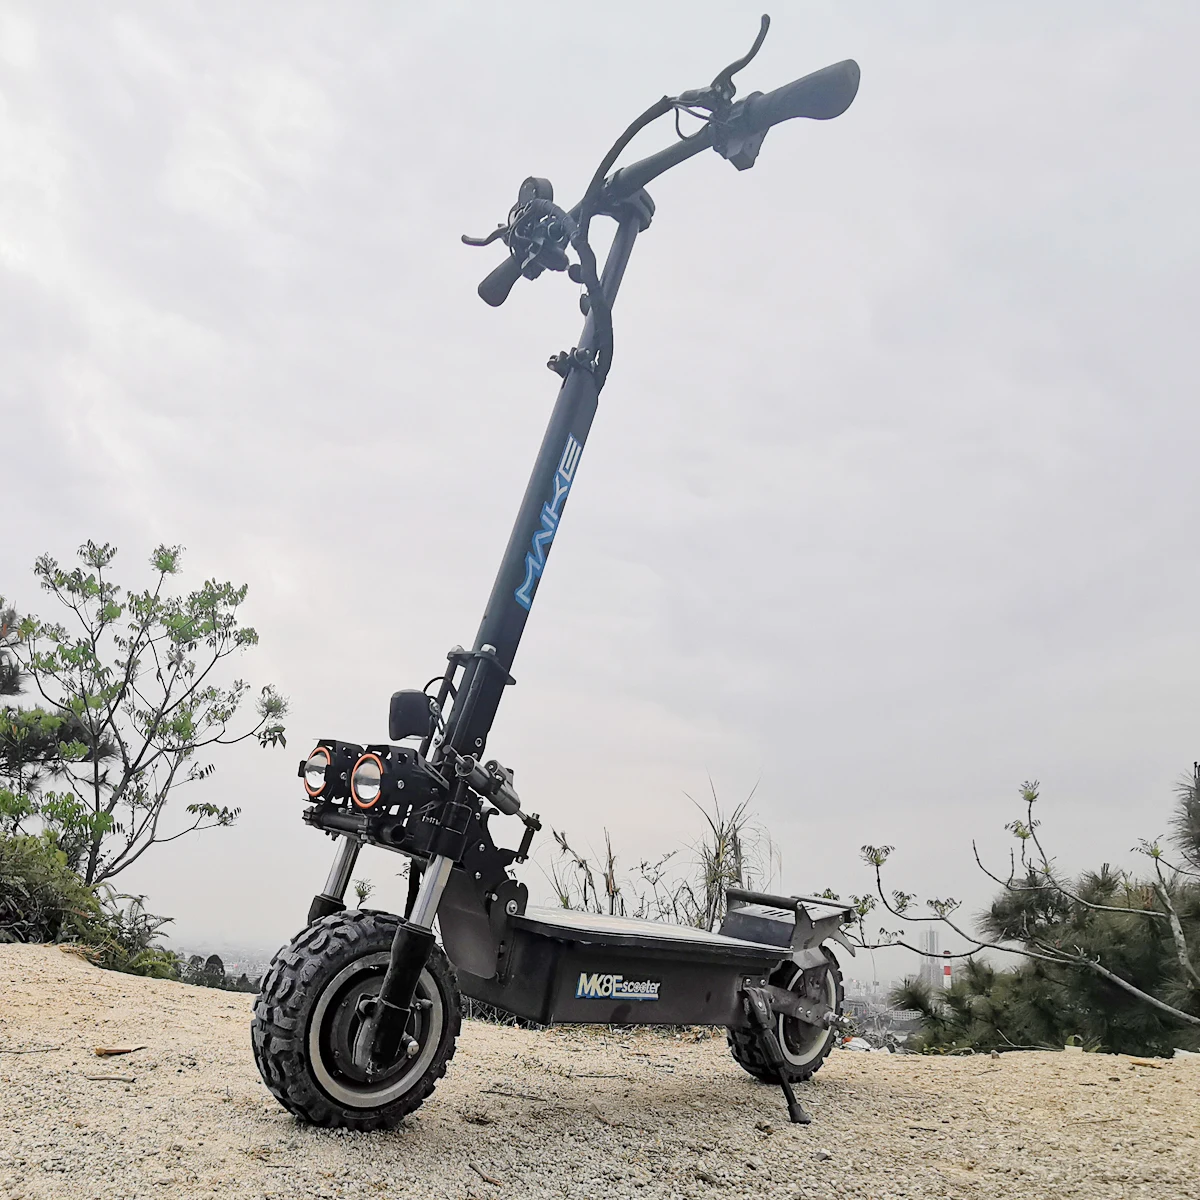 

China cheap Maike OEM MK8 11 inch off road 80 kmh fast electric scooter better than dualtron scooter, Black